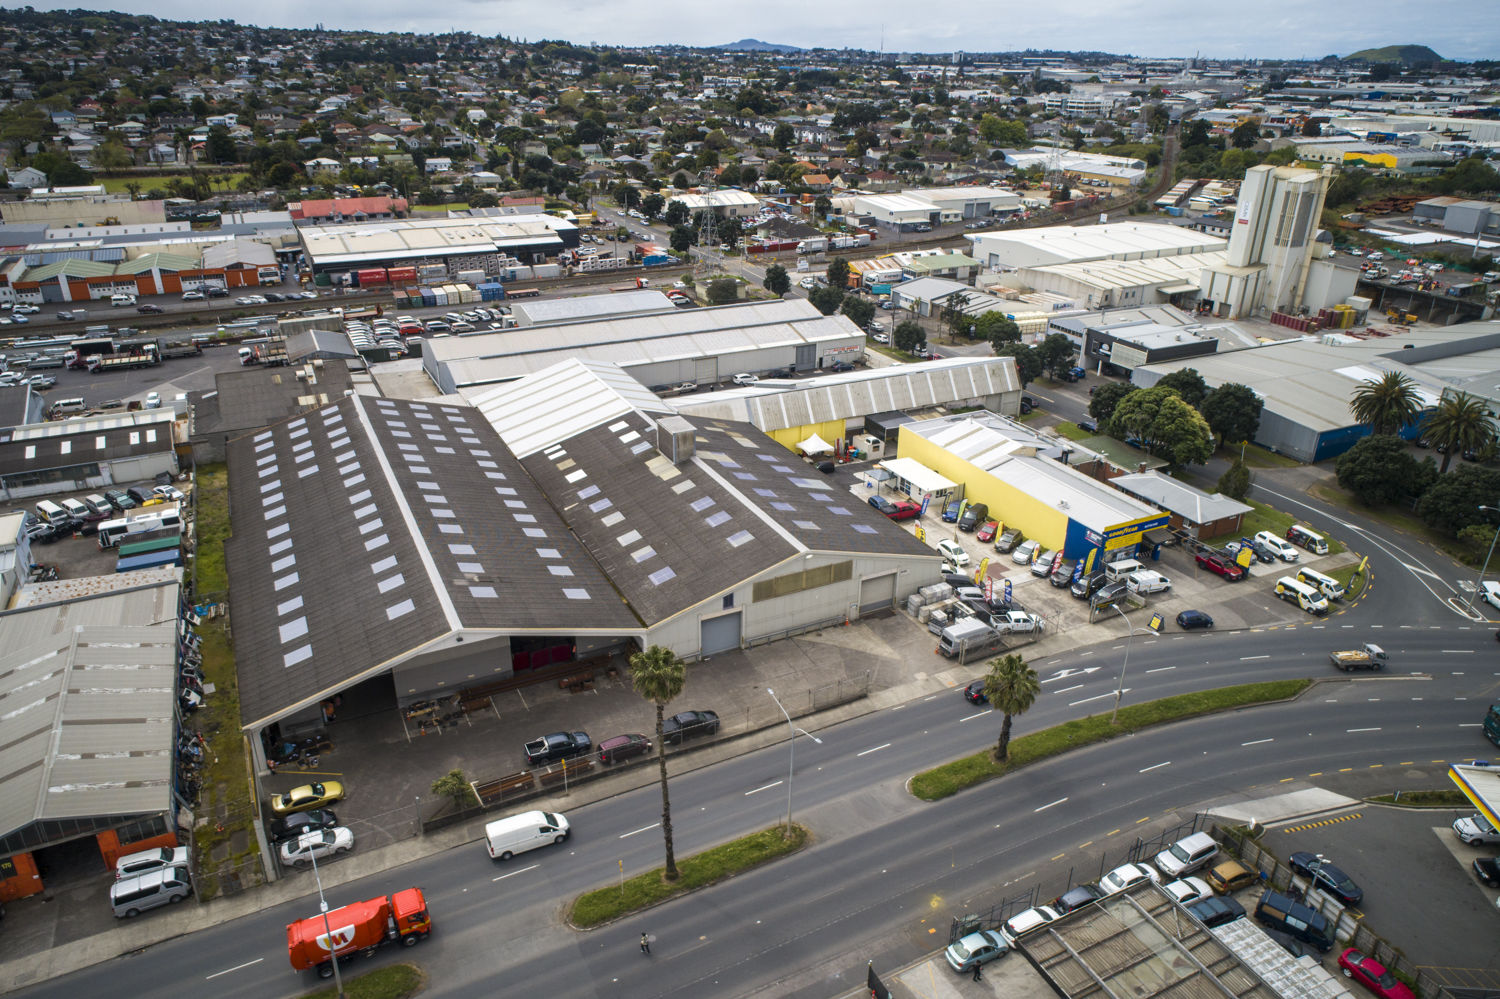 Lease Real Estate Auckland - Warehouse Property